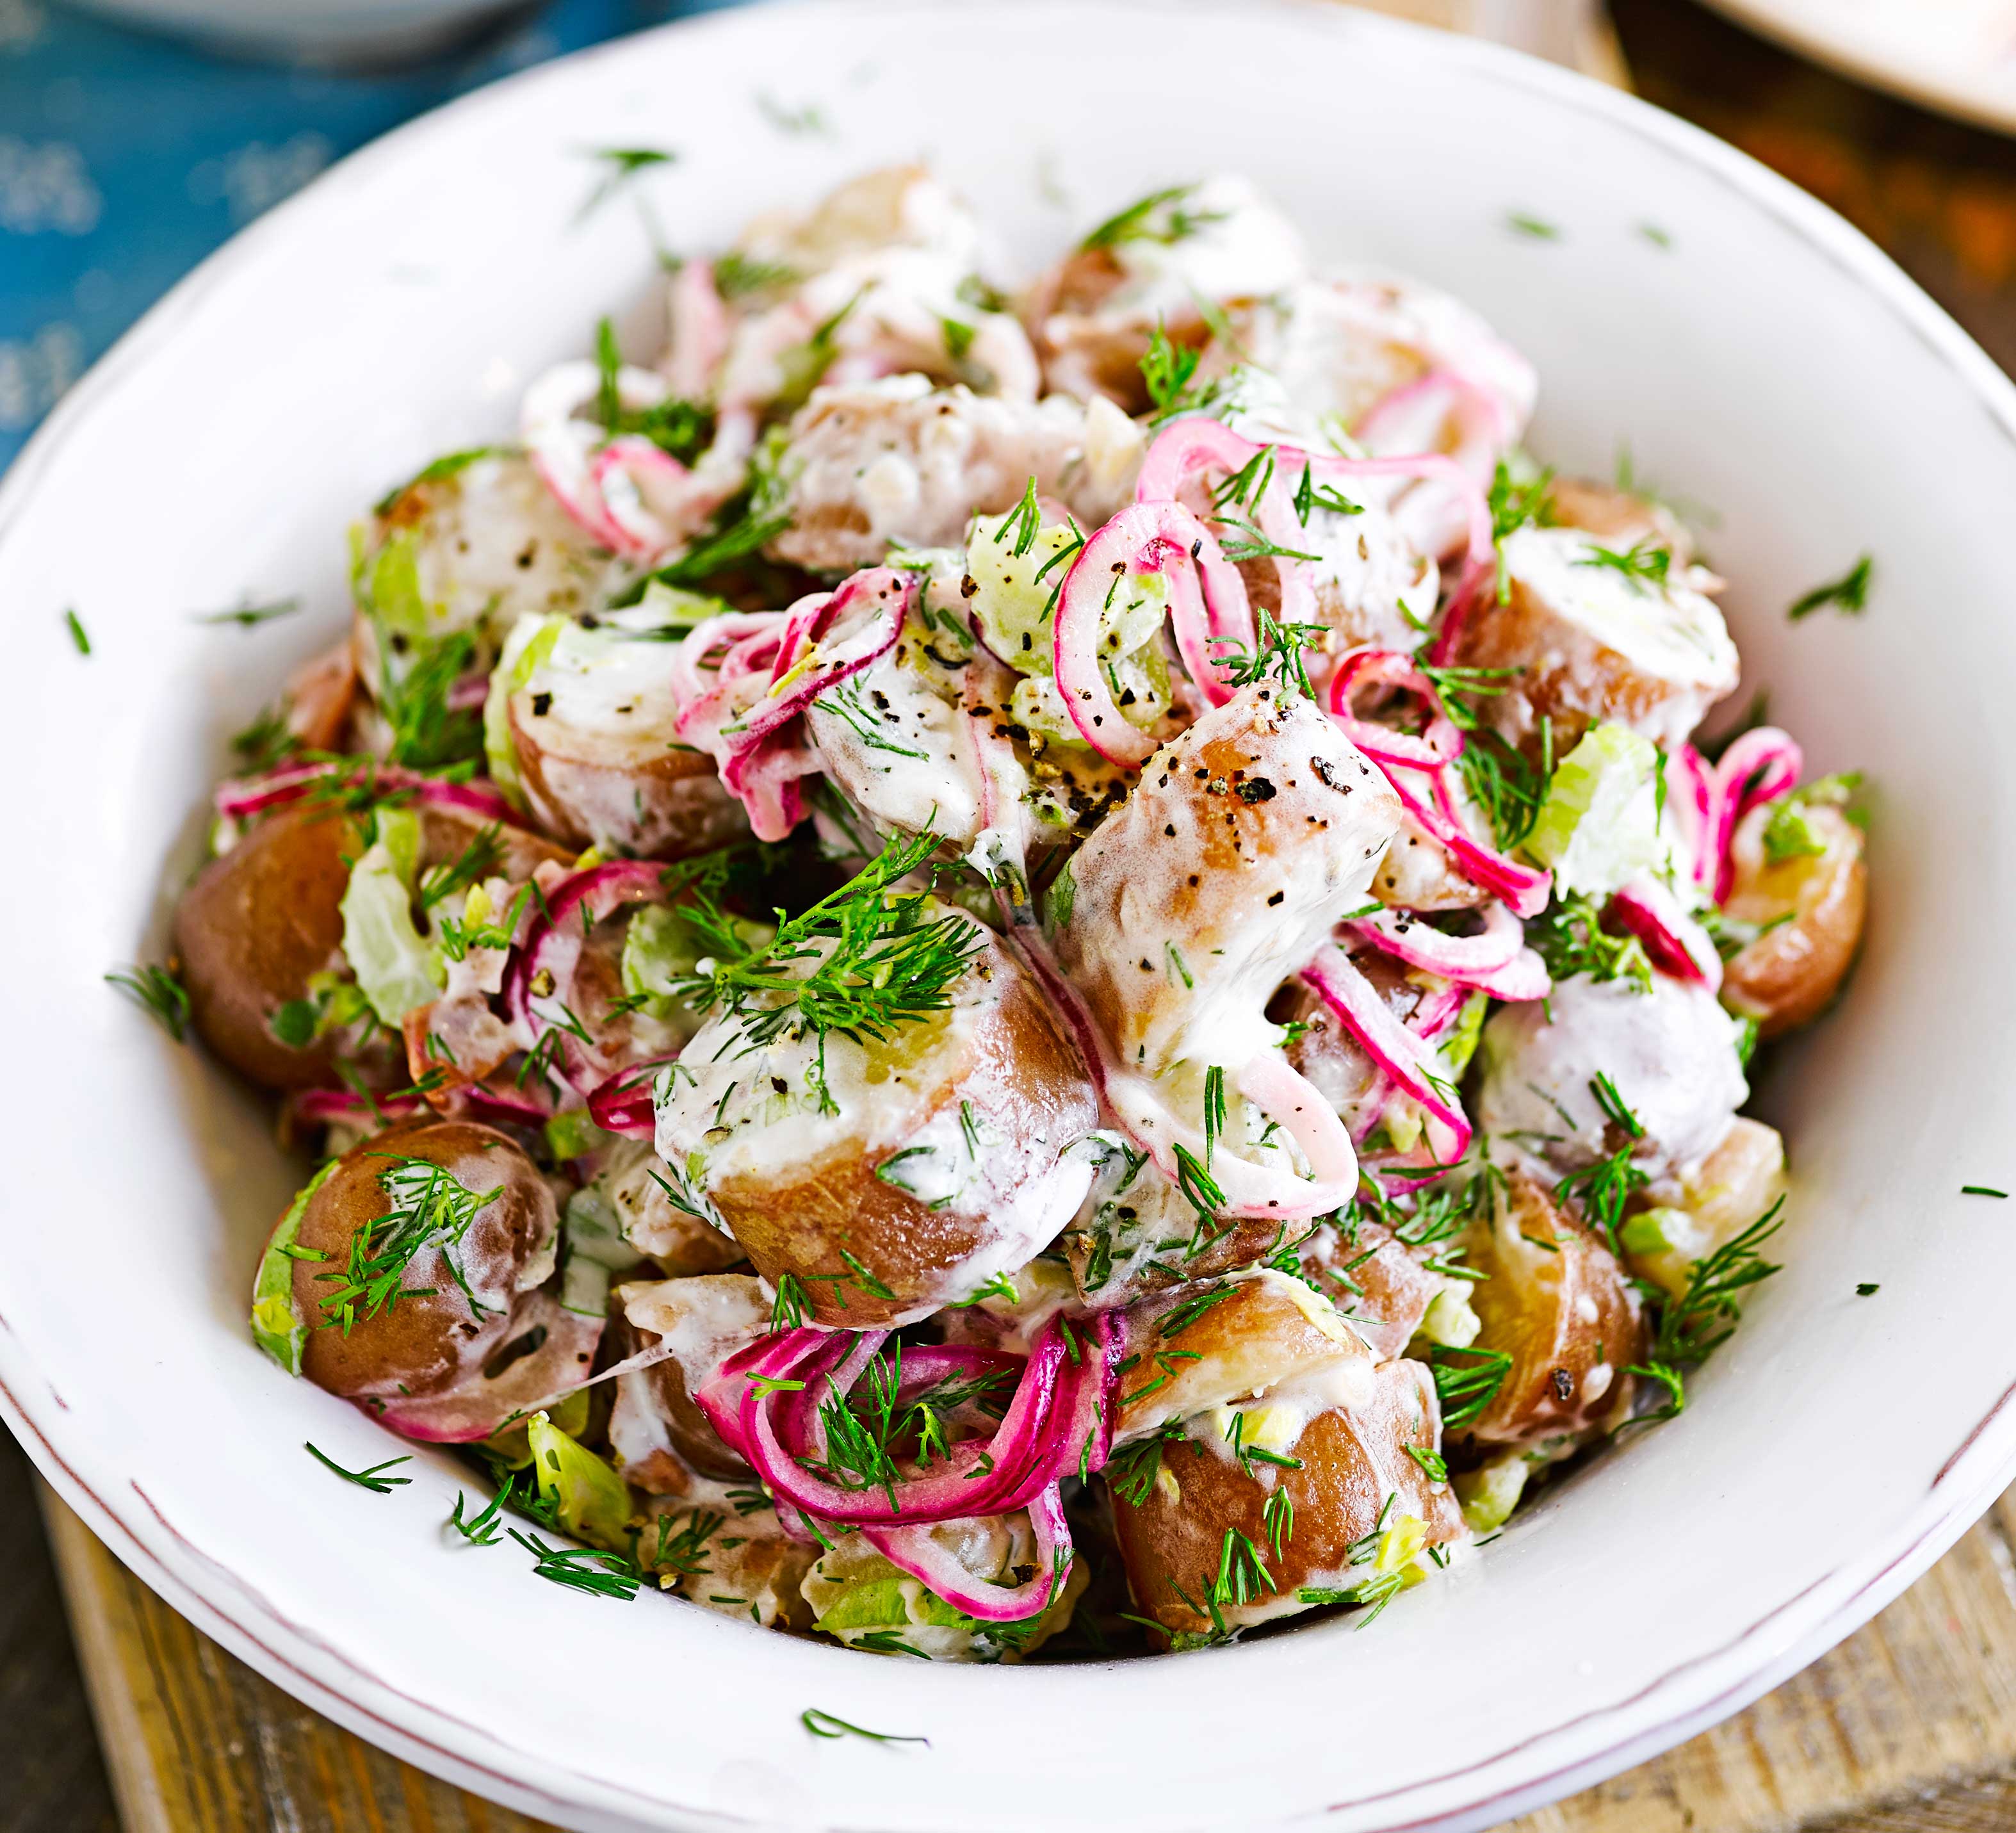 Red & white potato salad with pickled onions